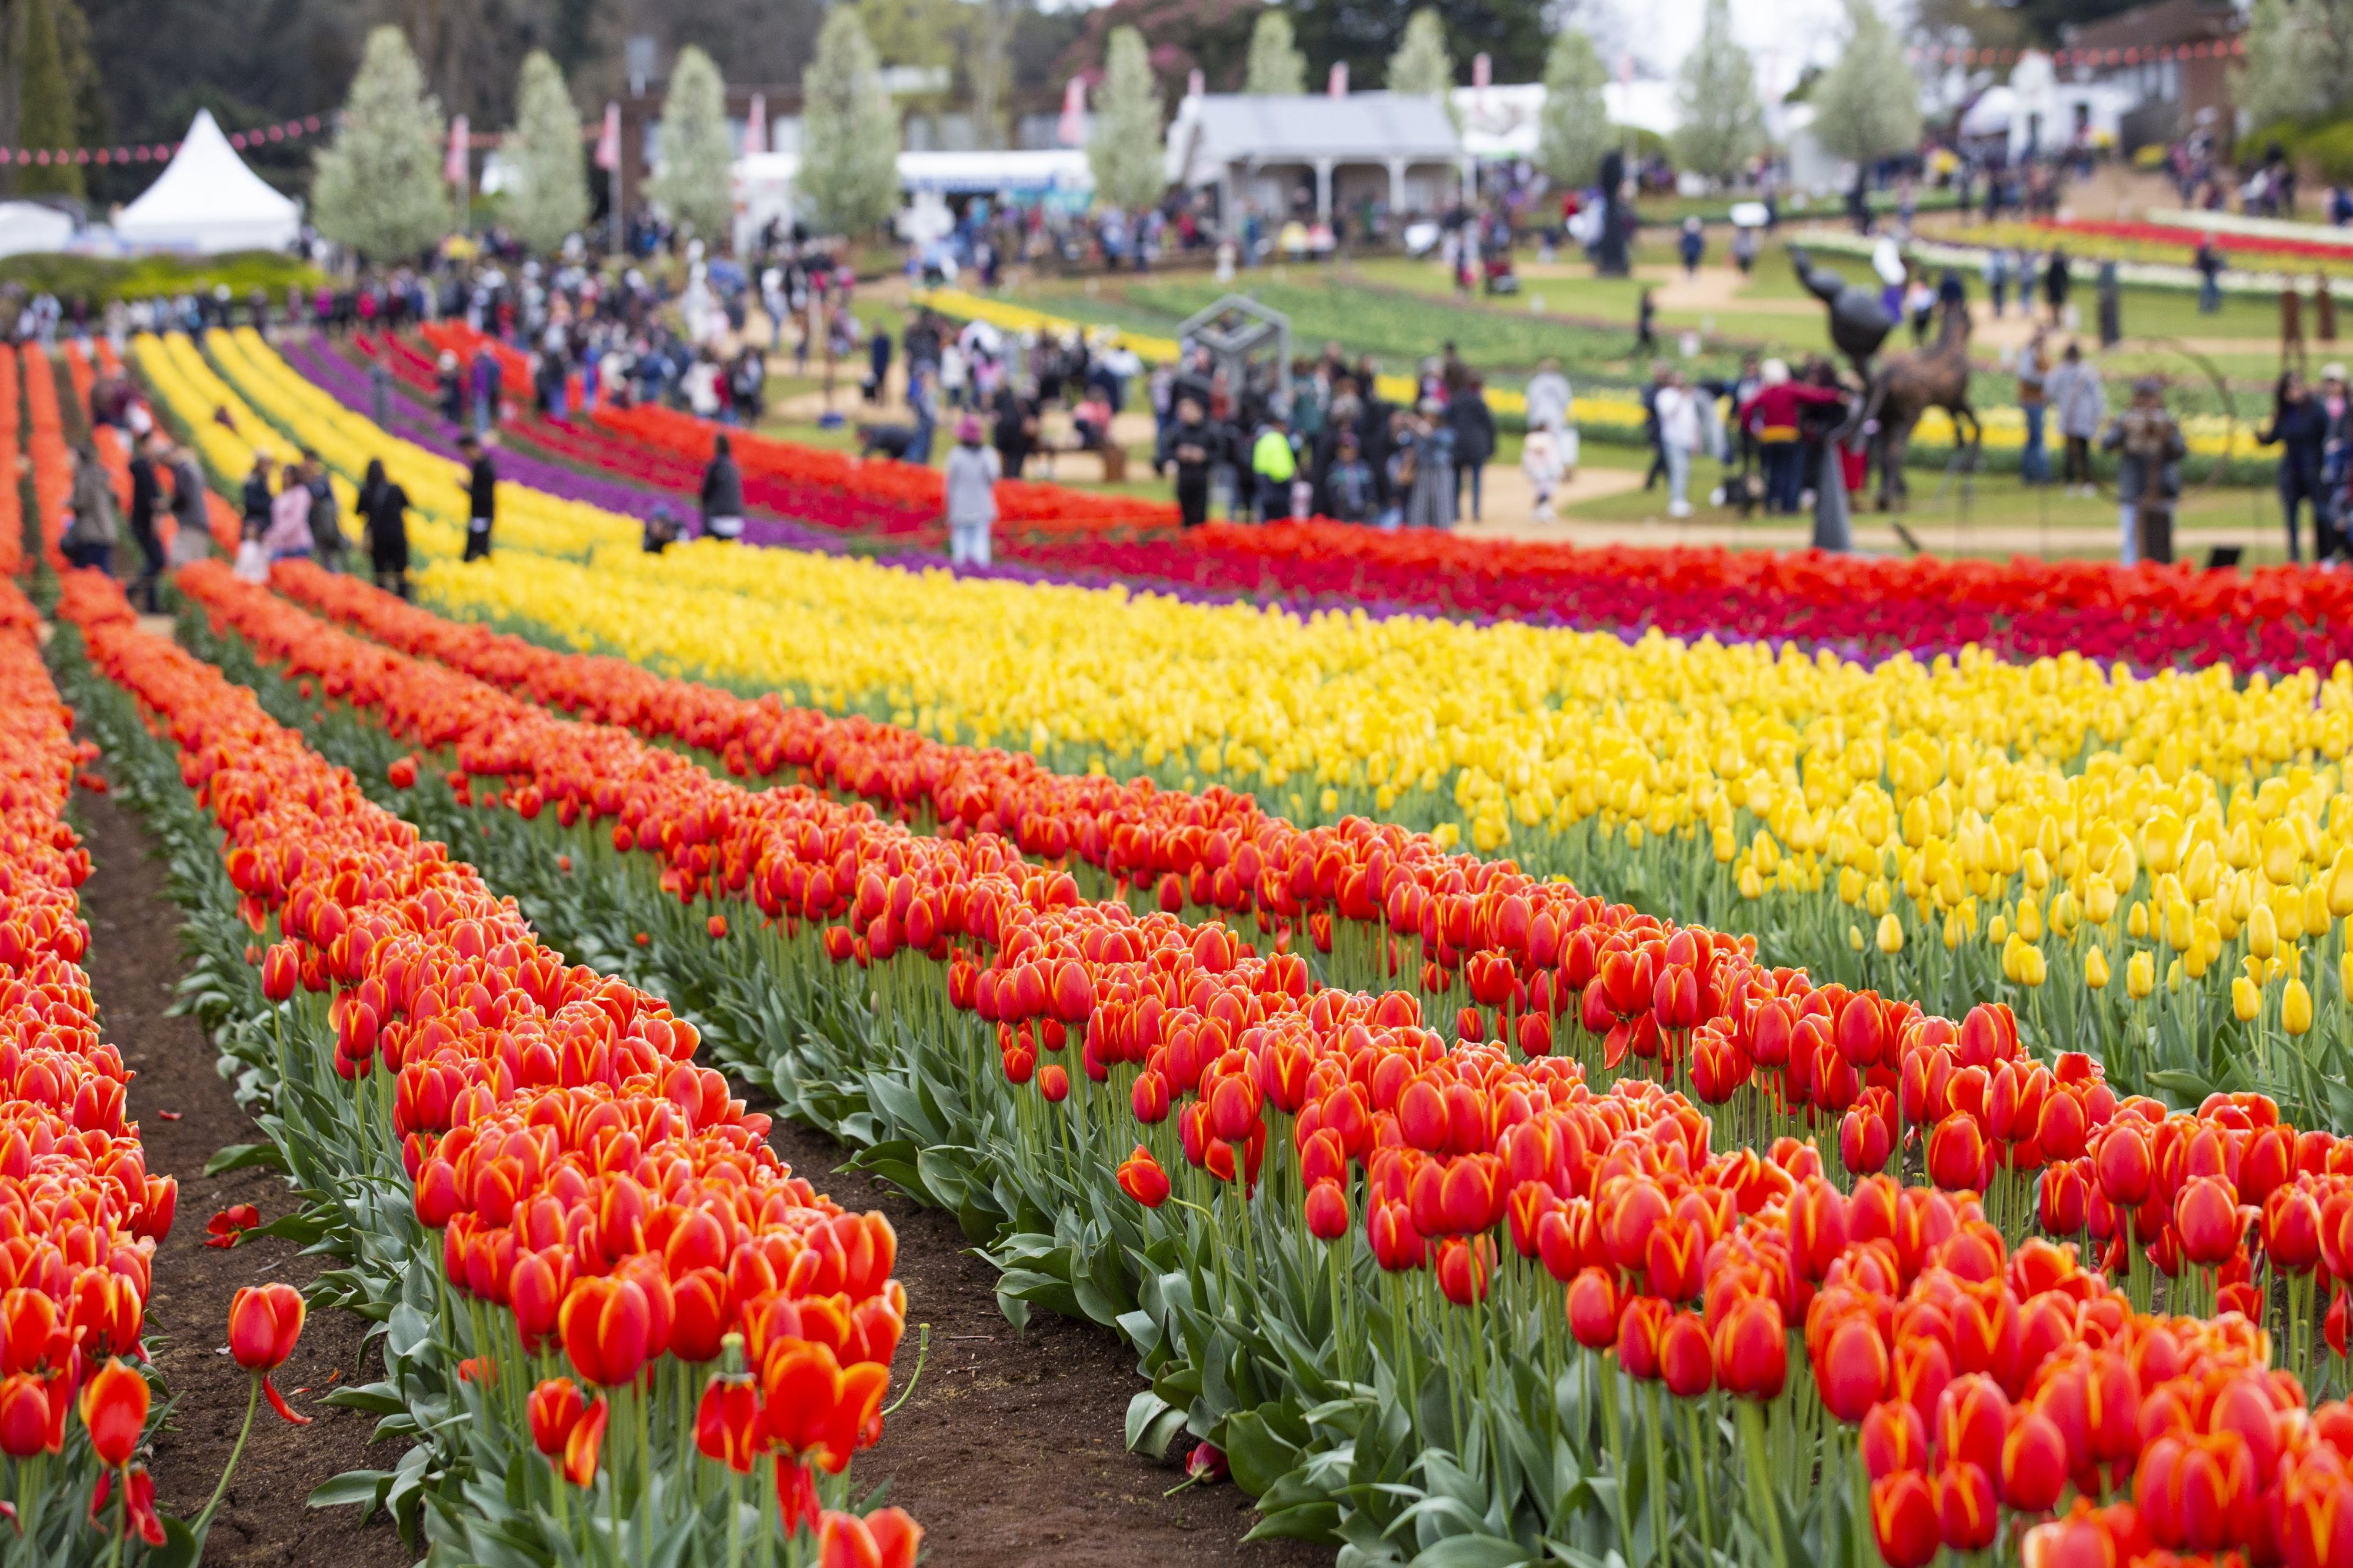 surround-yourself-with-900-000-flowers-at-this-huge-tulip-festival